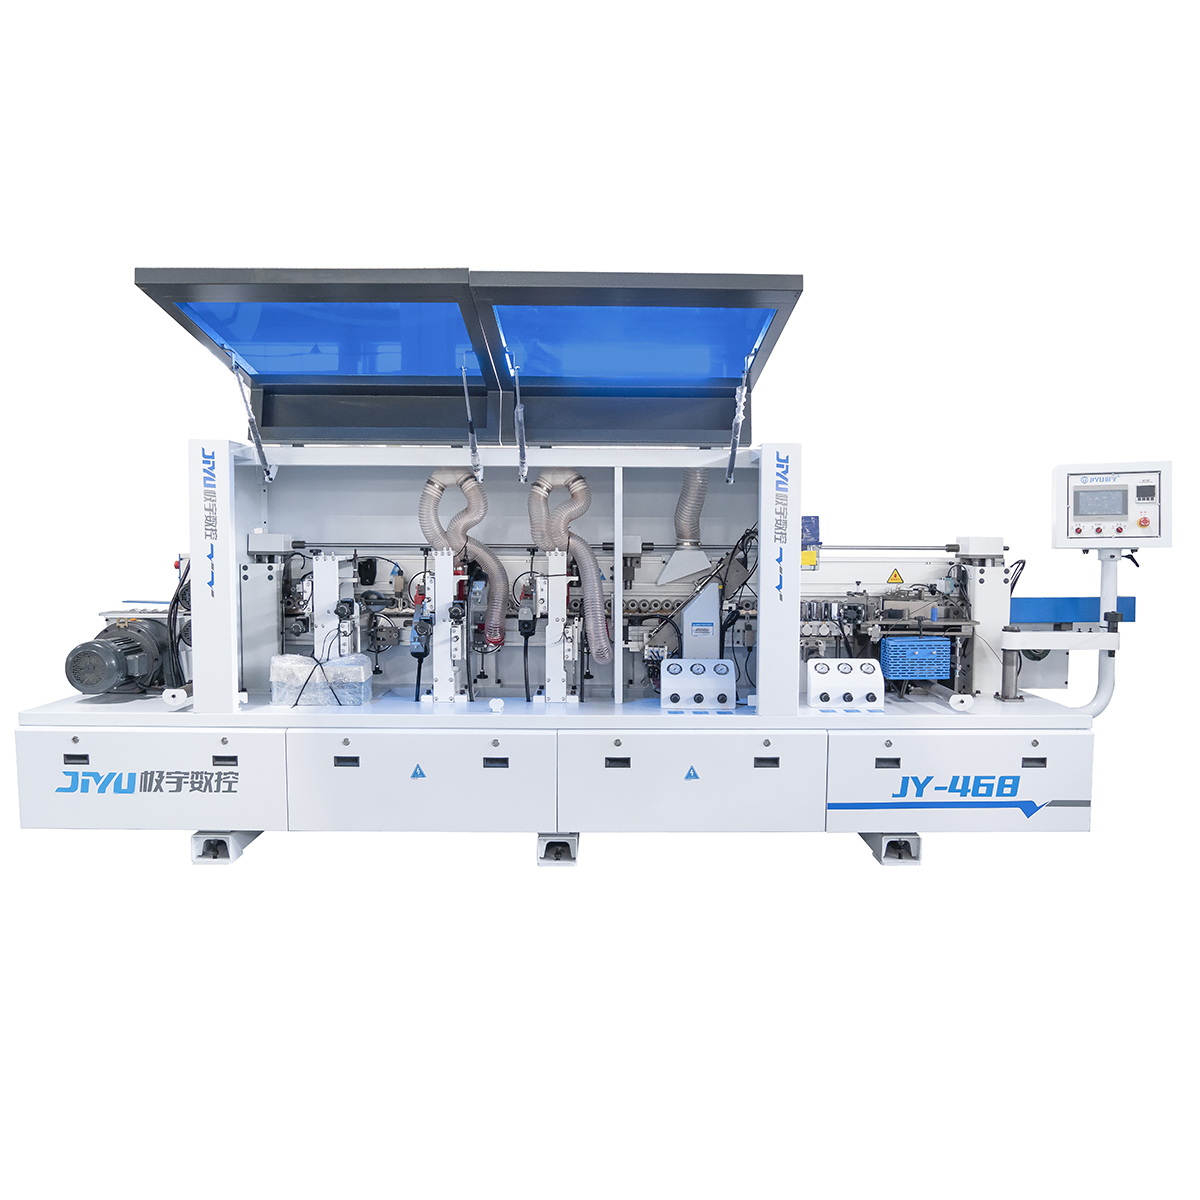 JY-468 Automatic Edge Banding Machine With Pre-milling & Double Trimming